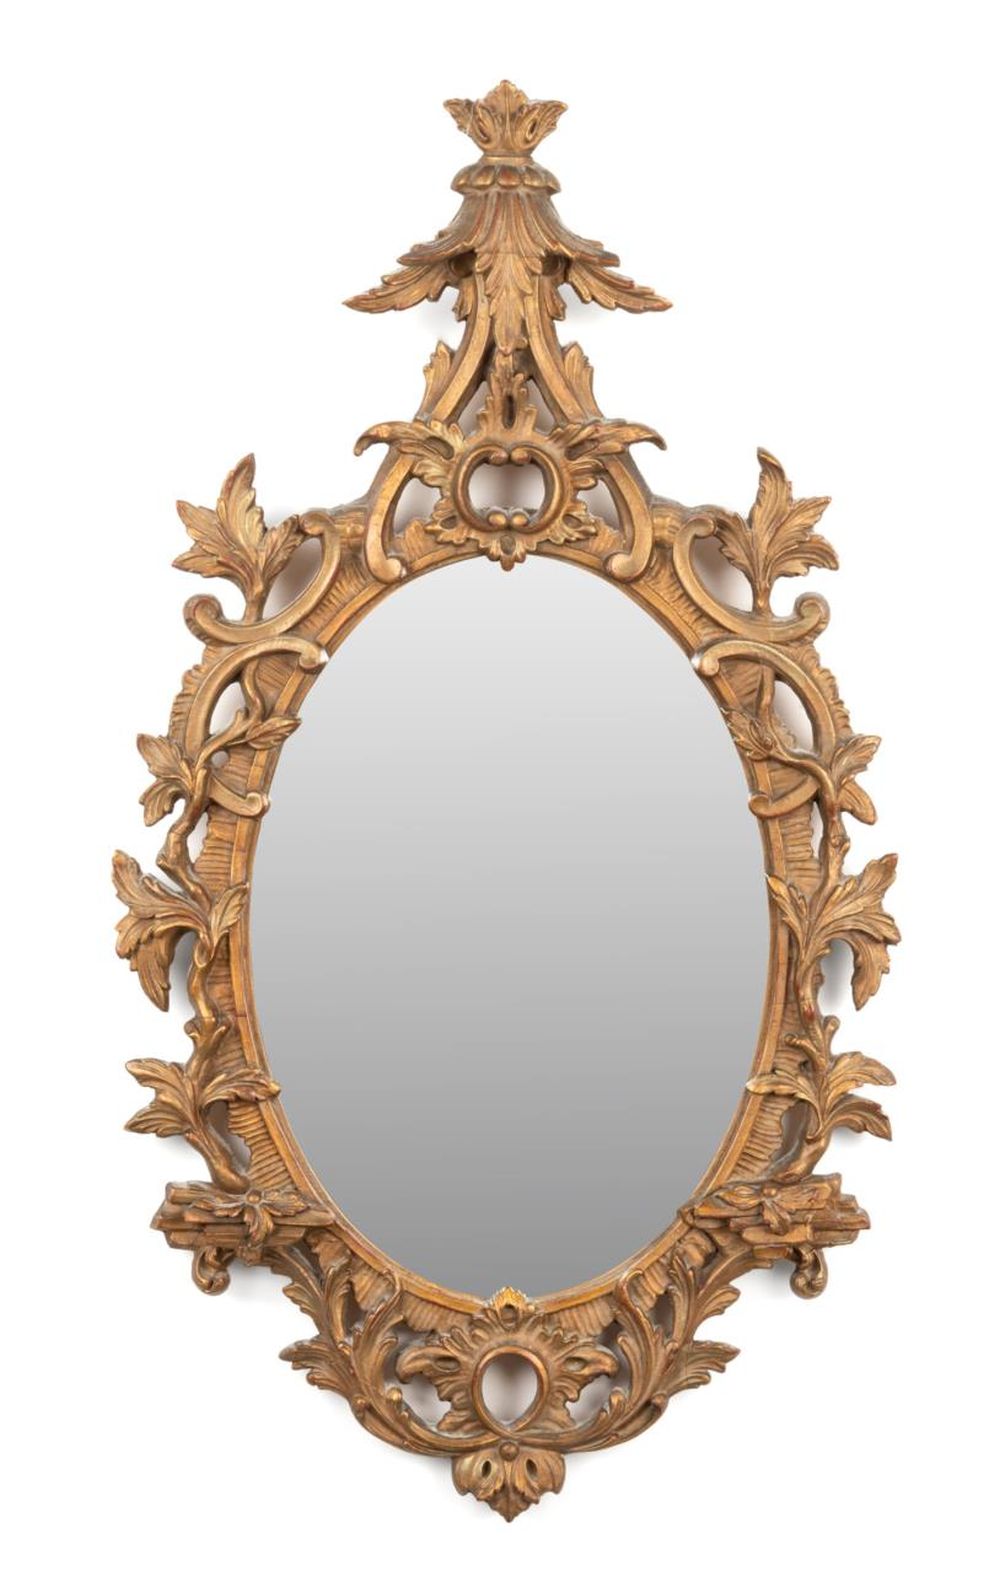 CHIPPENDALE STYLE CARVED OVAL MIRROR 3b3edc